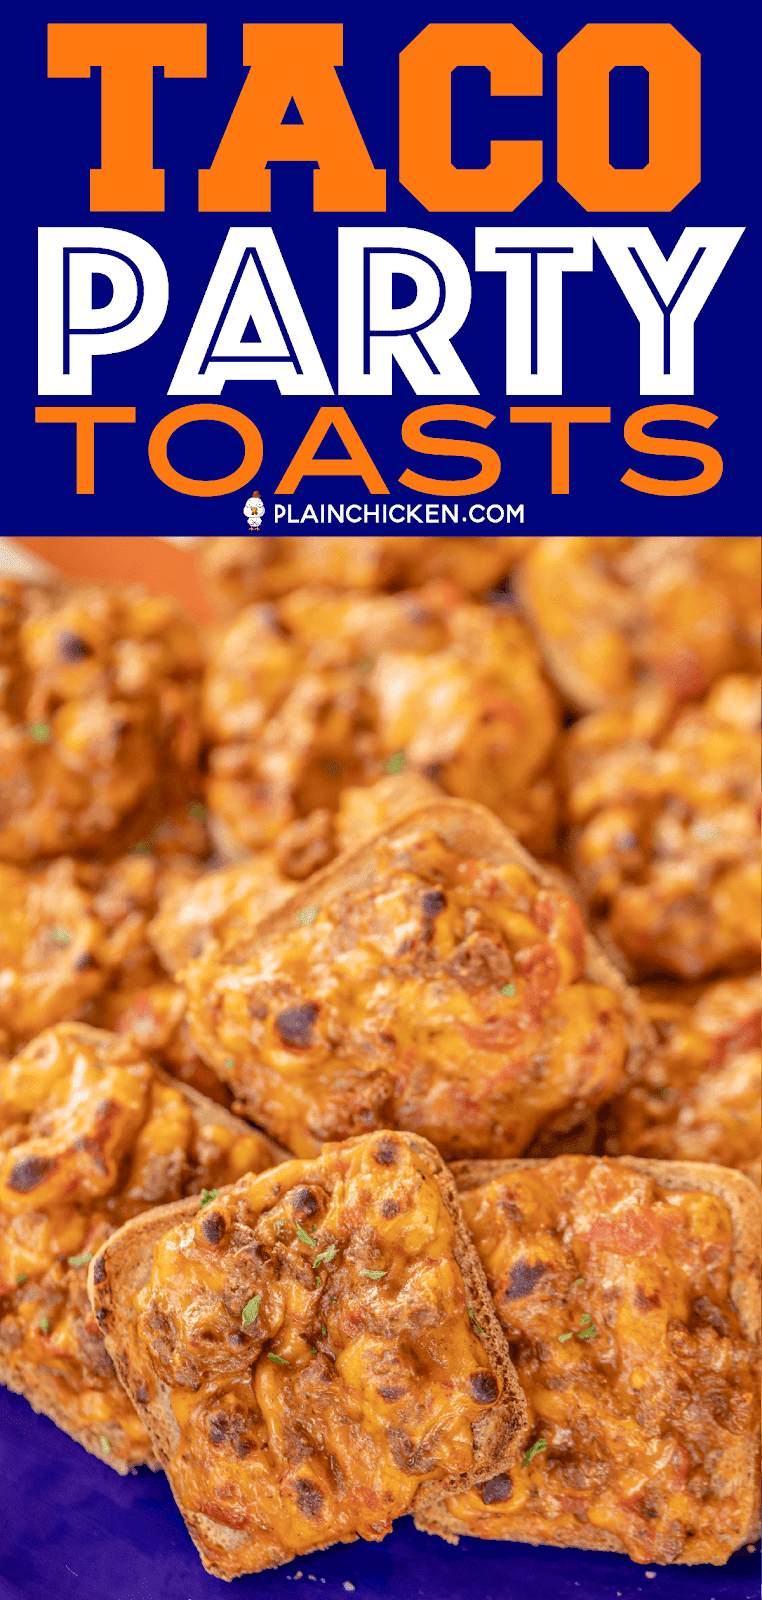 Taco Party Toasts - only 5 ingredients!! Seriously delicious! I took these to a party and they were gone in a flash. Ground beef, taco seasoning, diced tomatoes and green chiles, Velveeta cheese and party rye bread. Can make ahead of time and freezer for later. Great for any occasion - parties, tailgating or a quick lunch or dinner. Taco night was never so fun! #appetizer #taco #tailgating #partyfood 